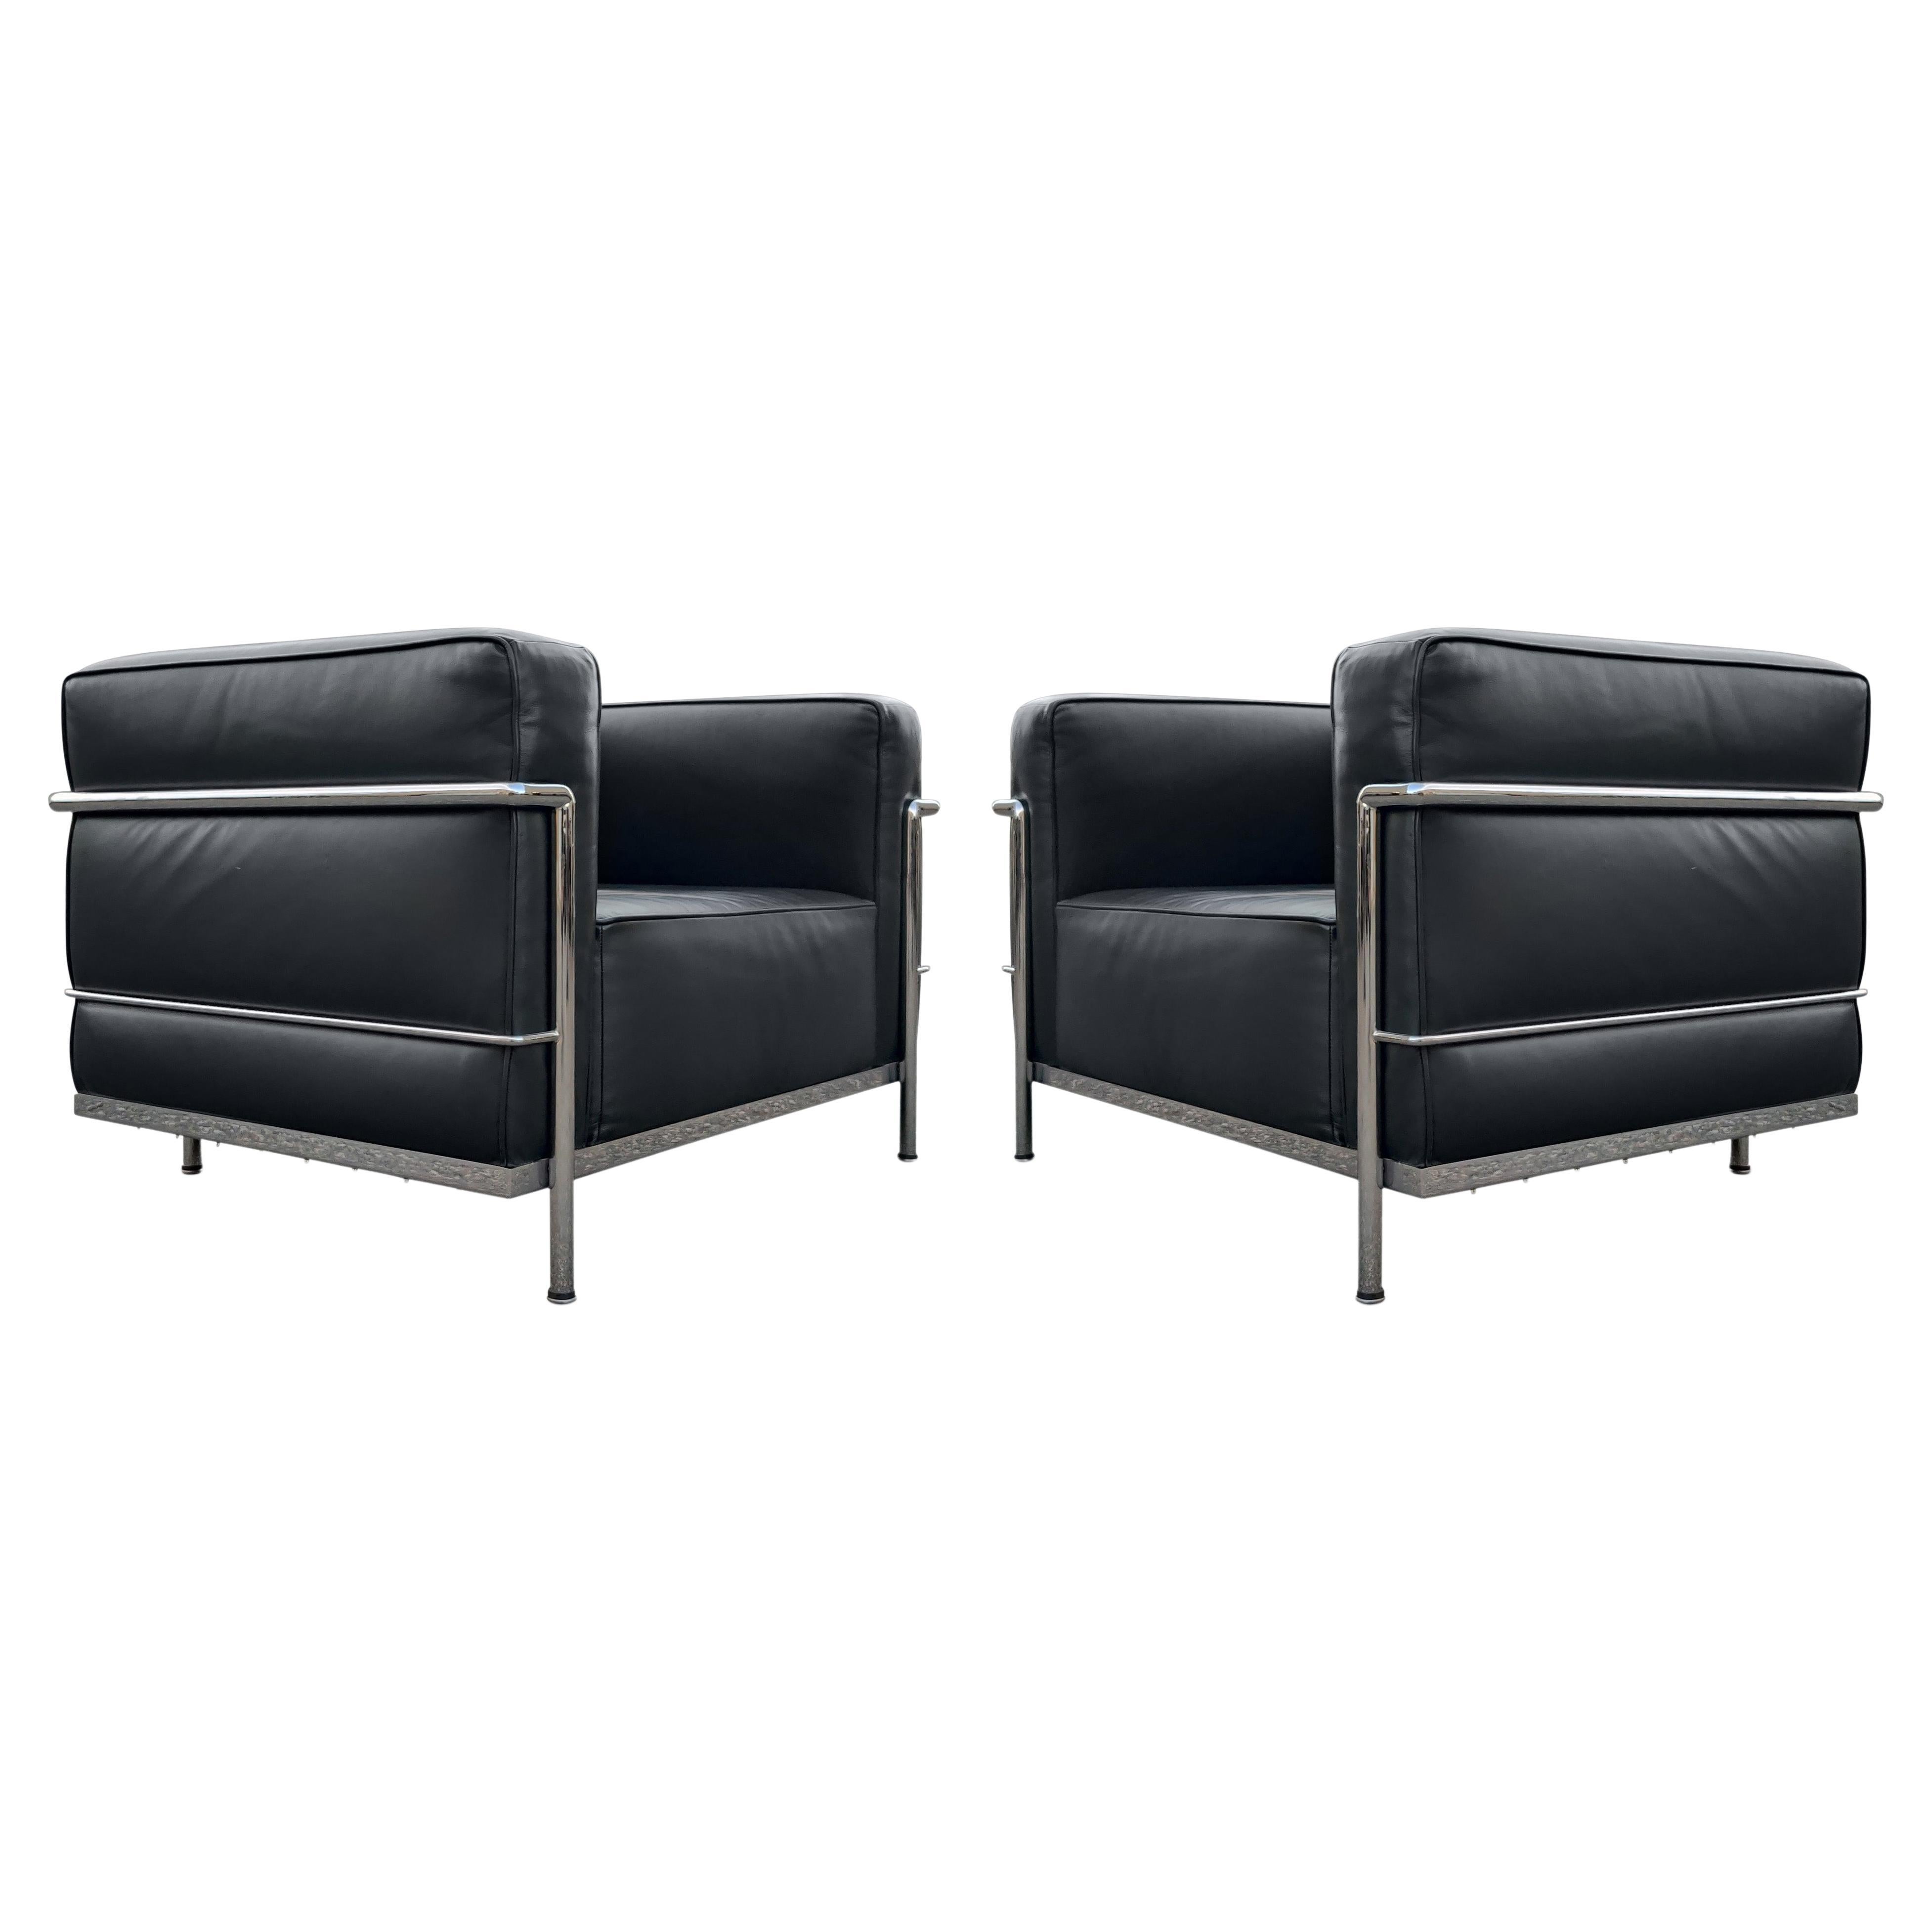 A pair of lounge or club chairs by Le Corbusier, LC8 Grand Confort, in black leather upholstery and triple chrome-plated steel frames. Each chair is signed and in like new condition! Super clean and super comfortable! LC/8: W 39 D 29 H 26.5 St Ht 14.